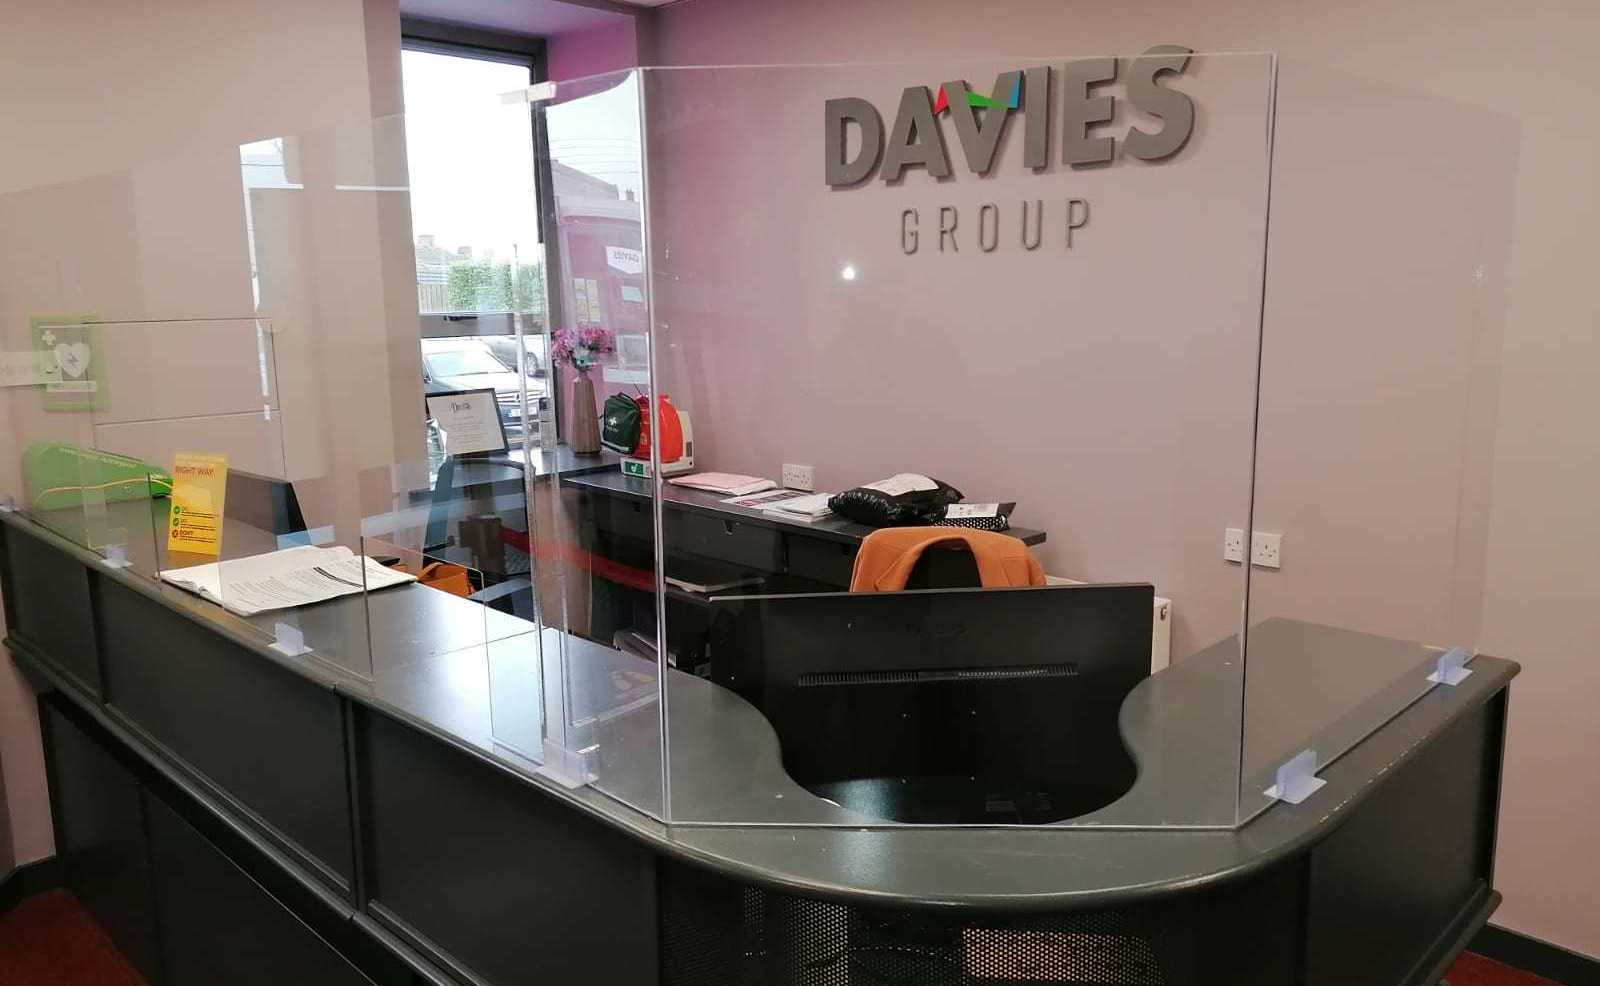 Inyernal reception sign  for the Davis Group